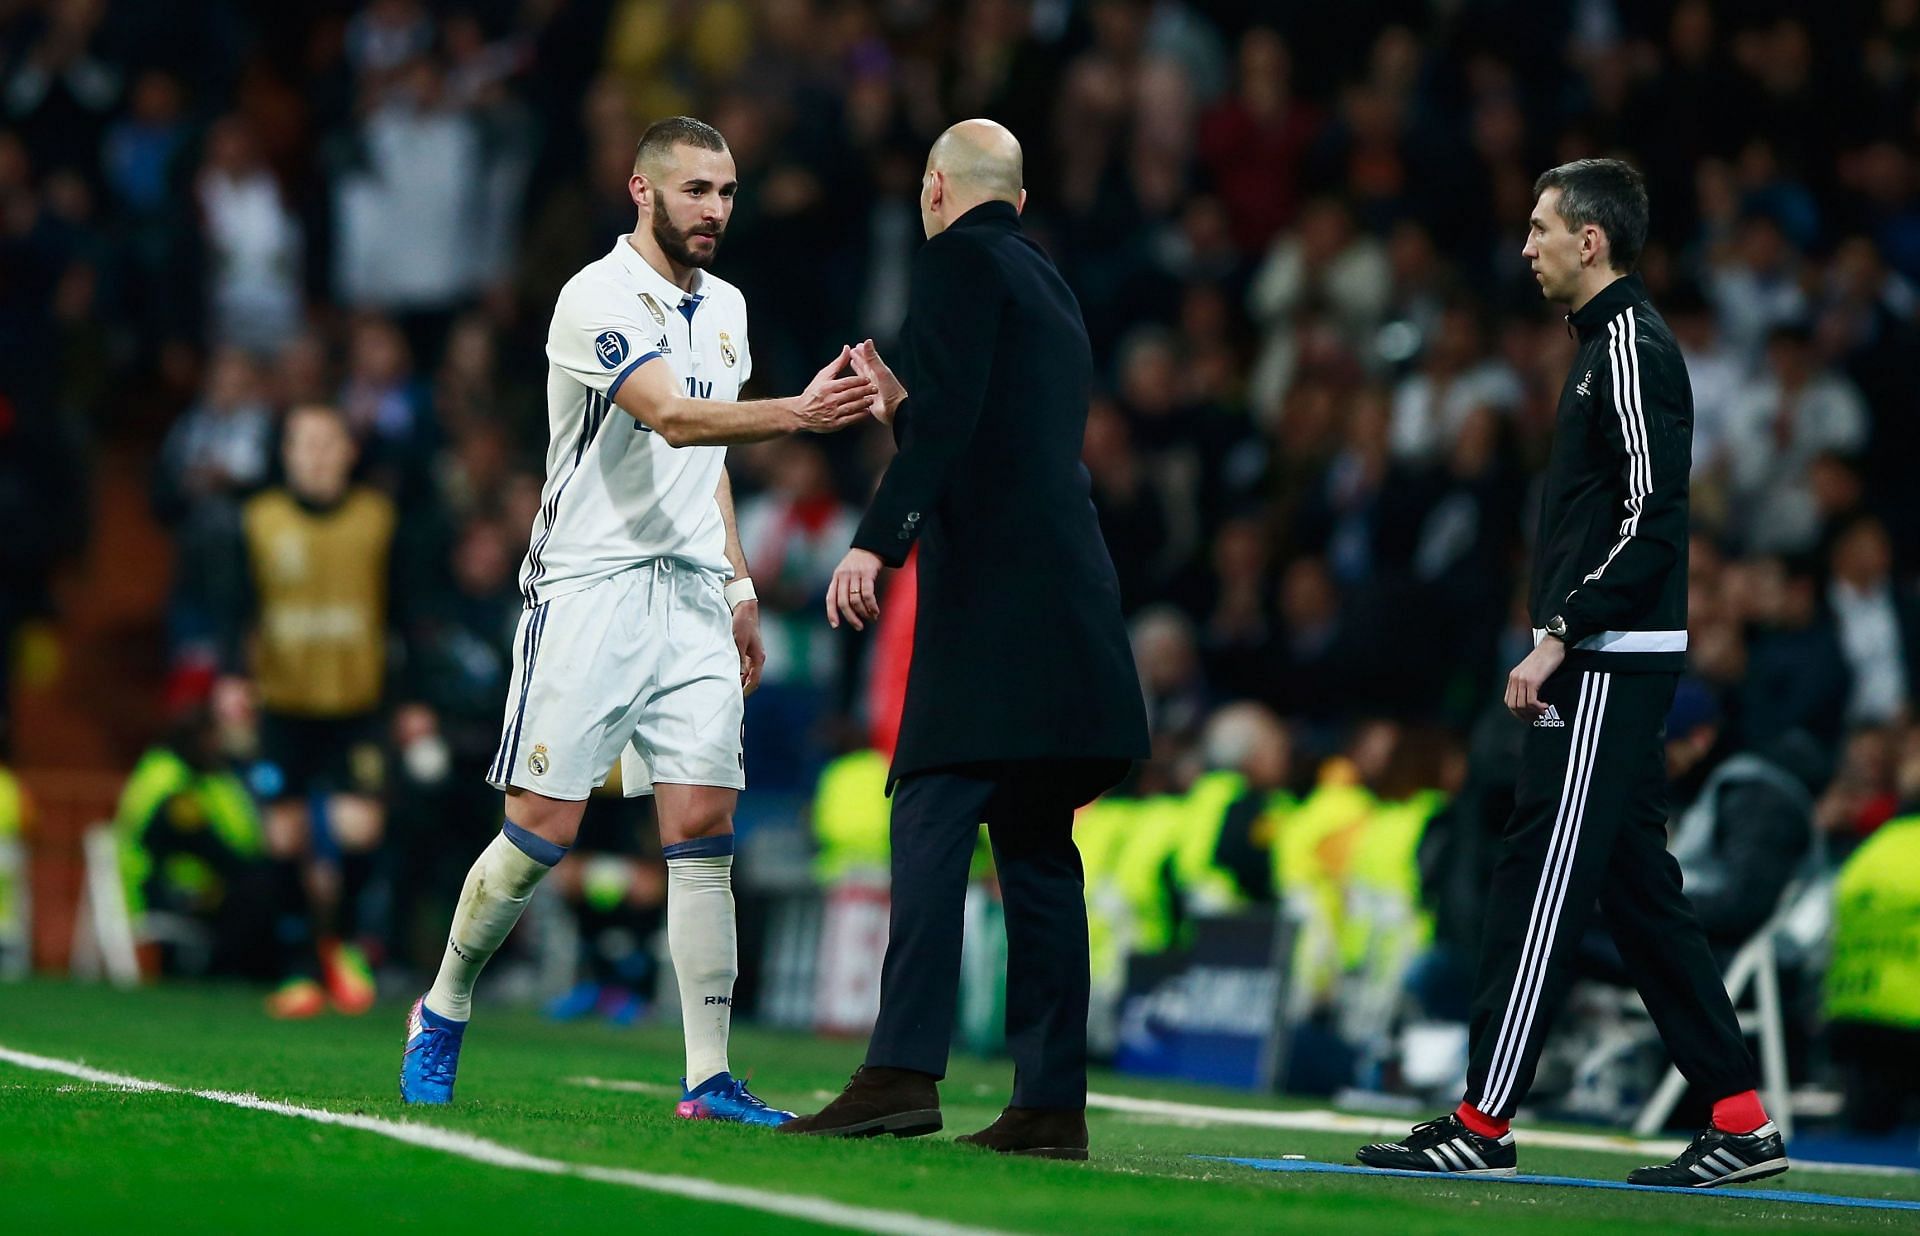 Karim Benzema (L) greets Zidane after being subbed off.